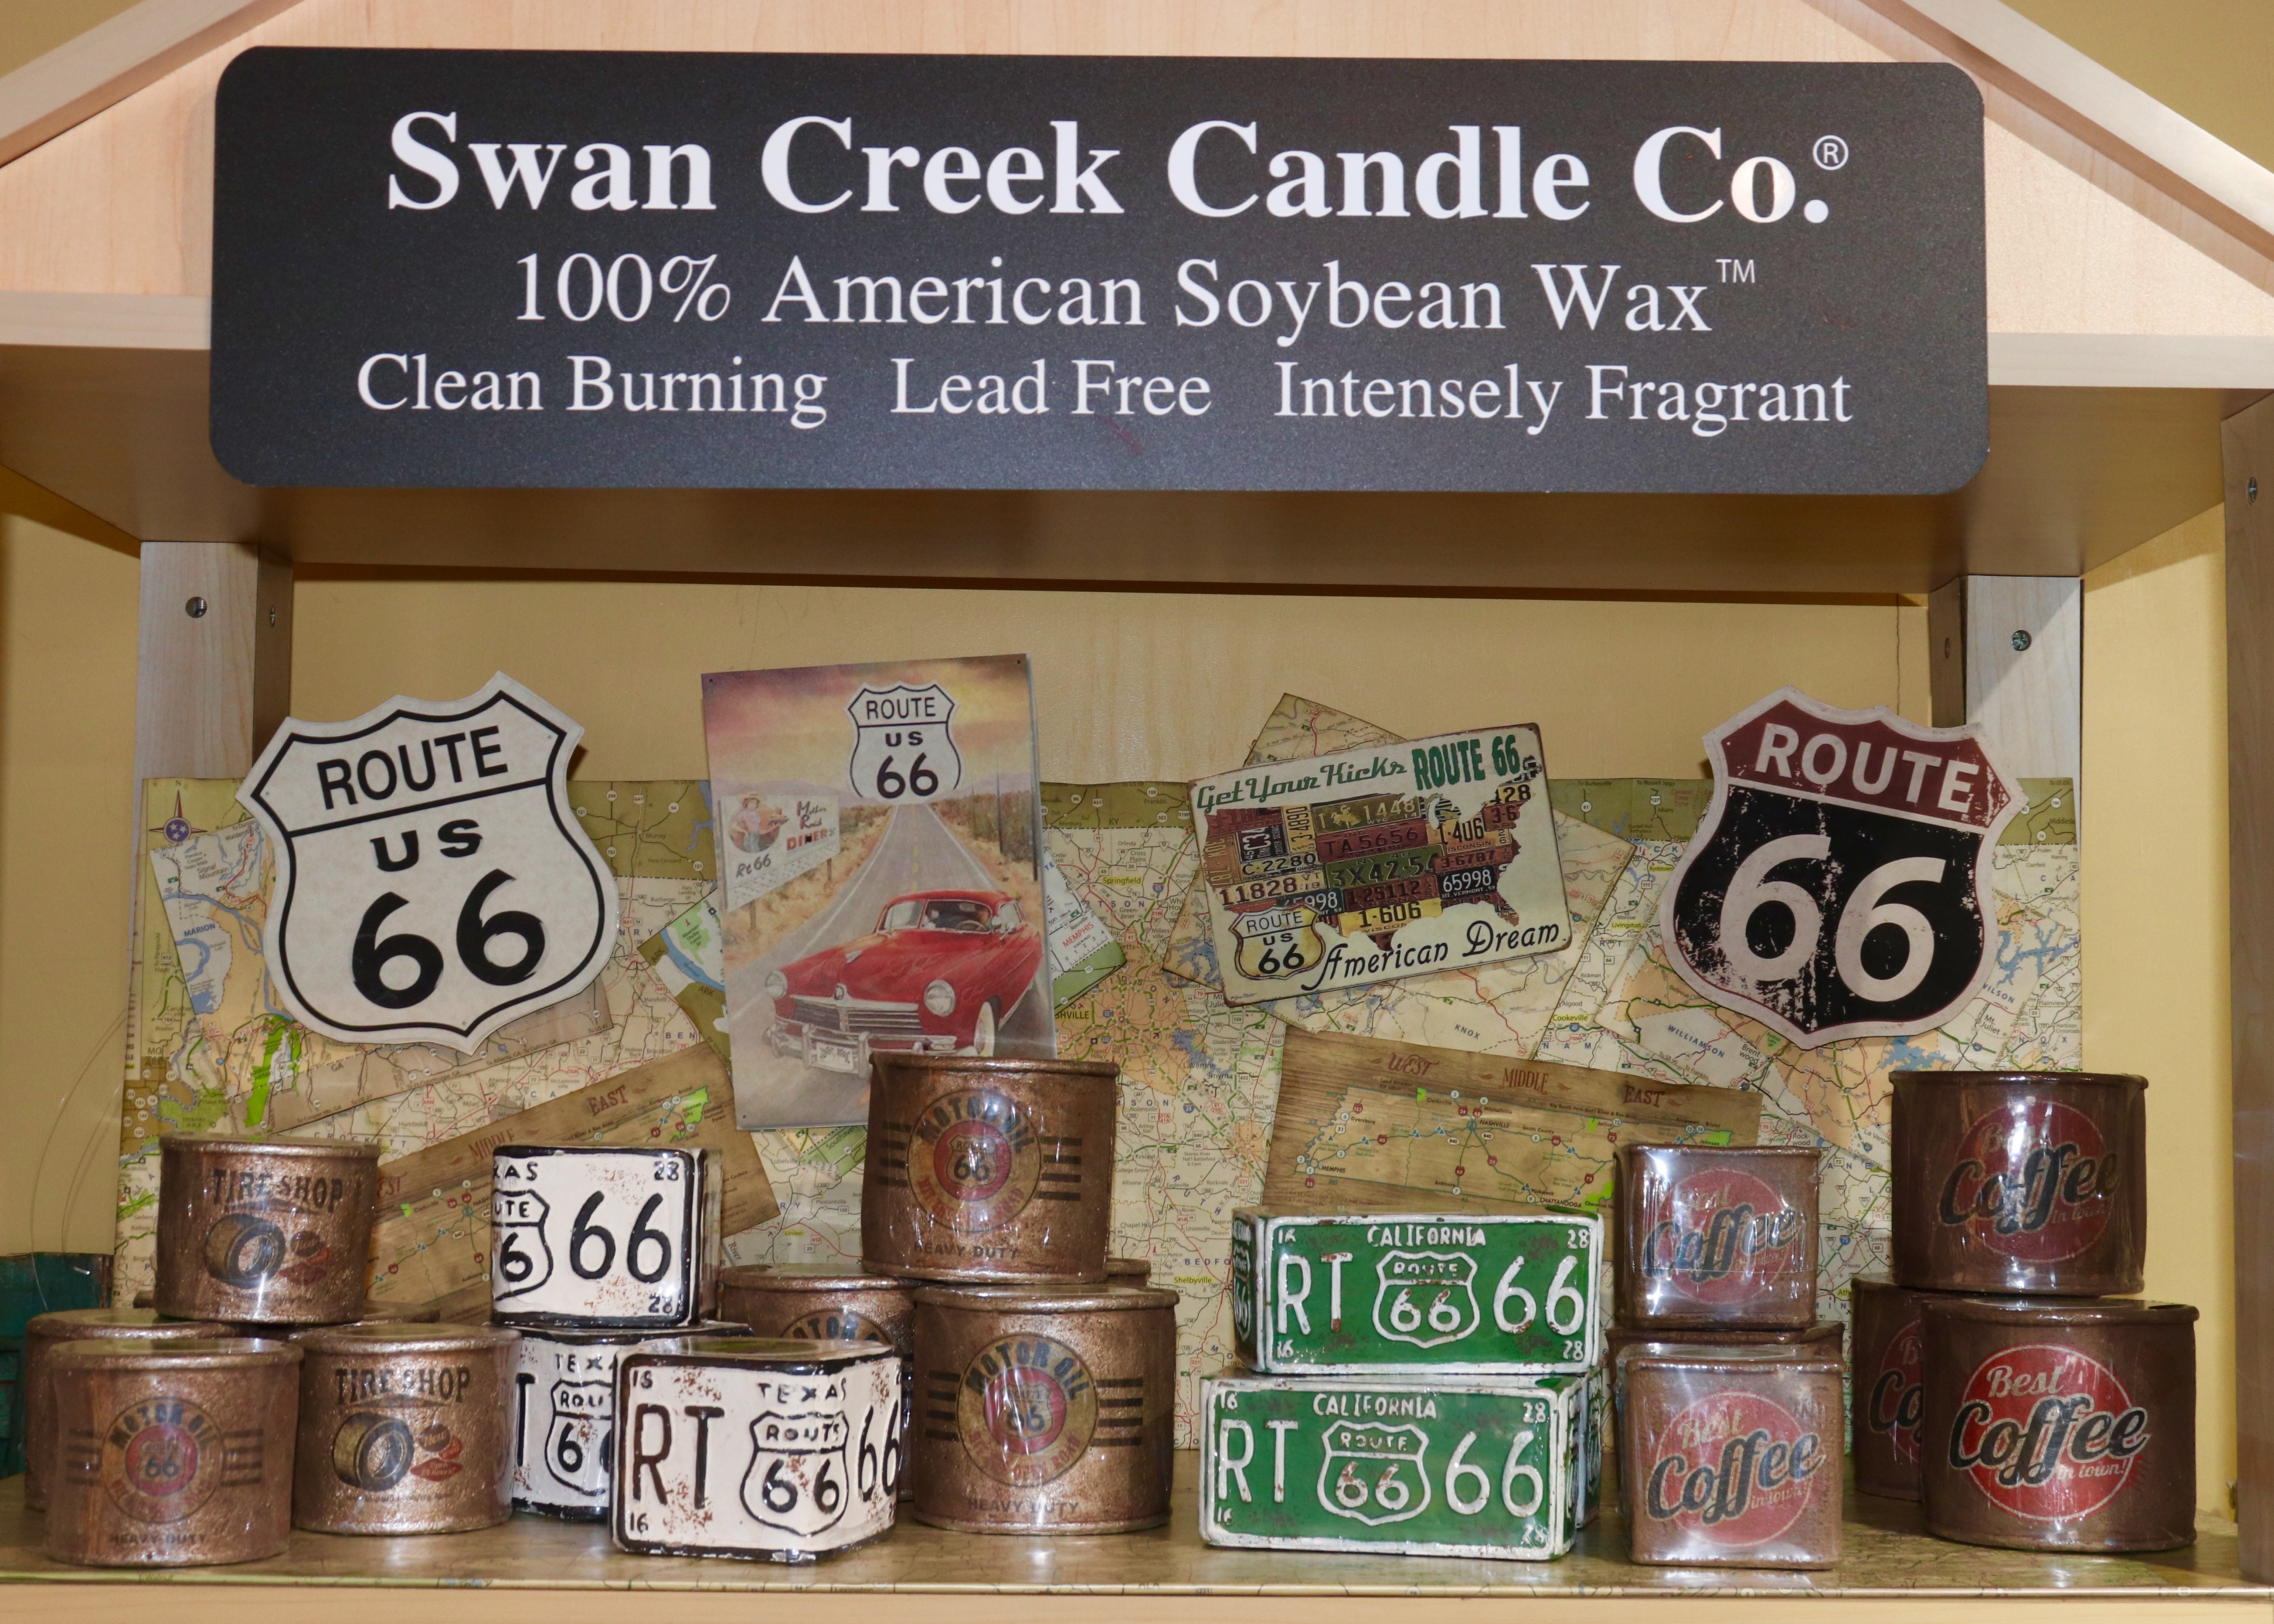 We have candles from Swan Creek Candle Co.!